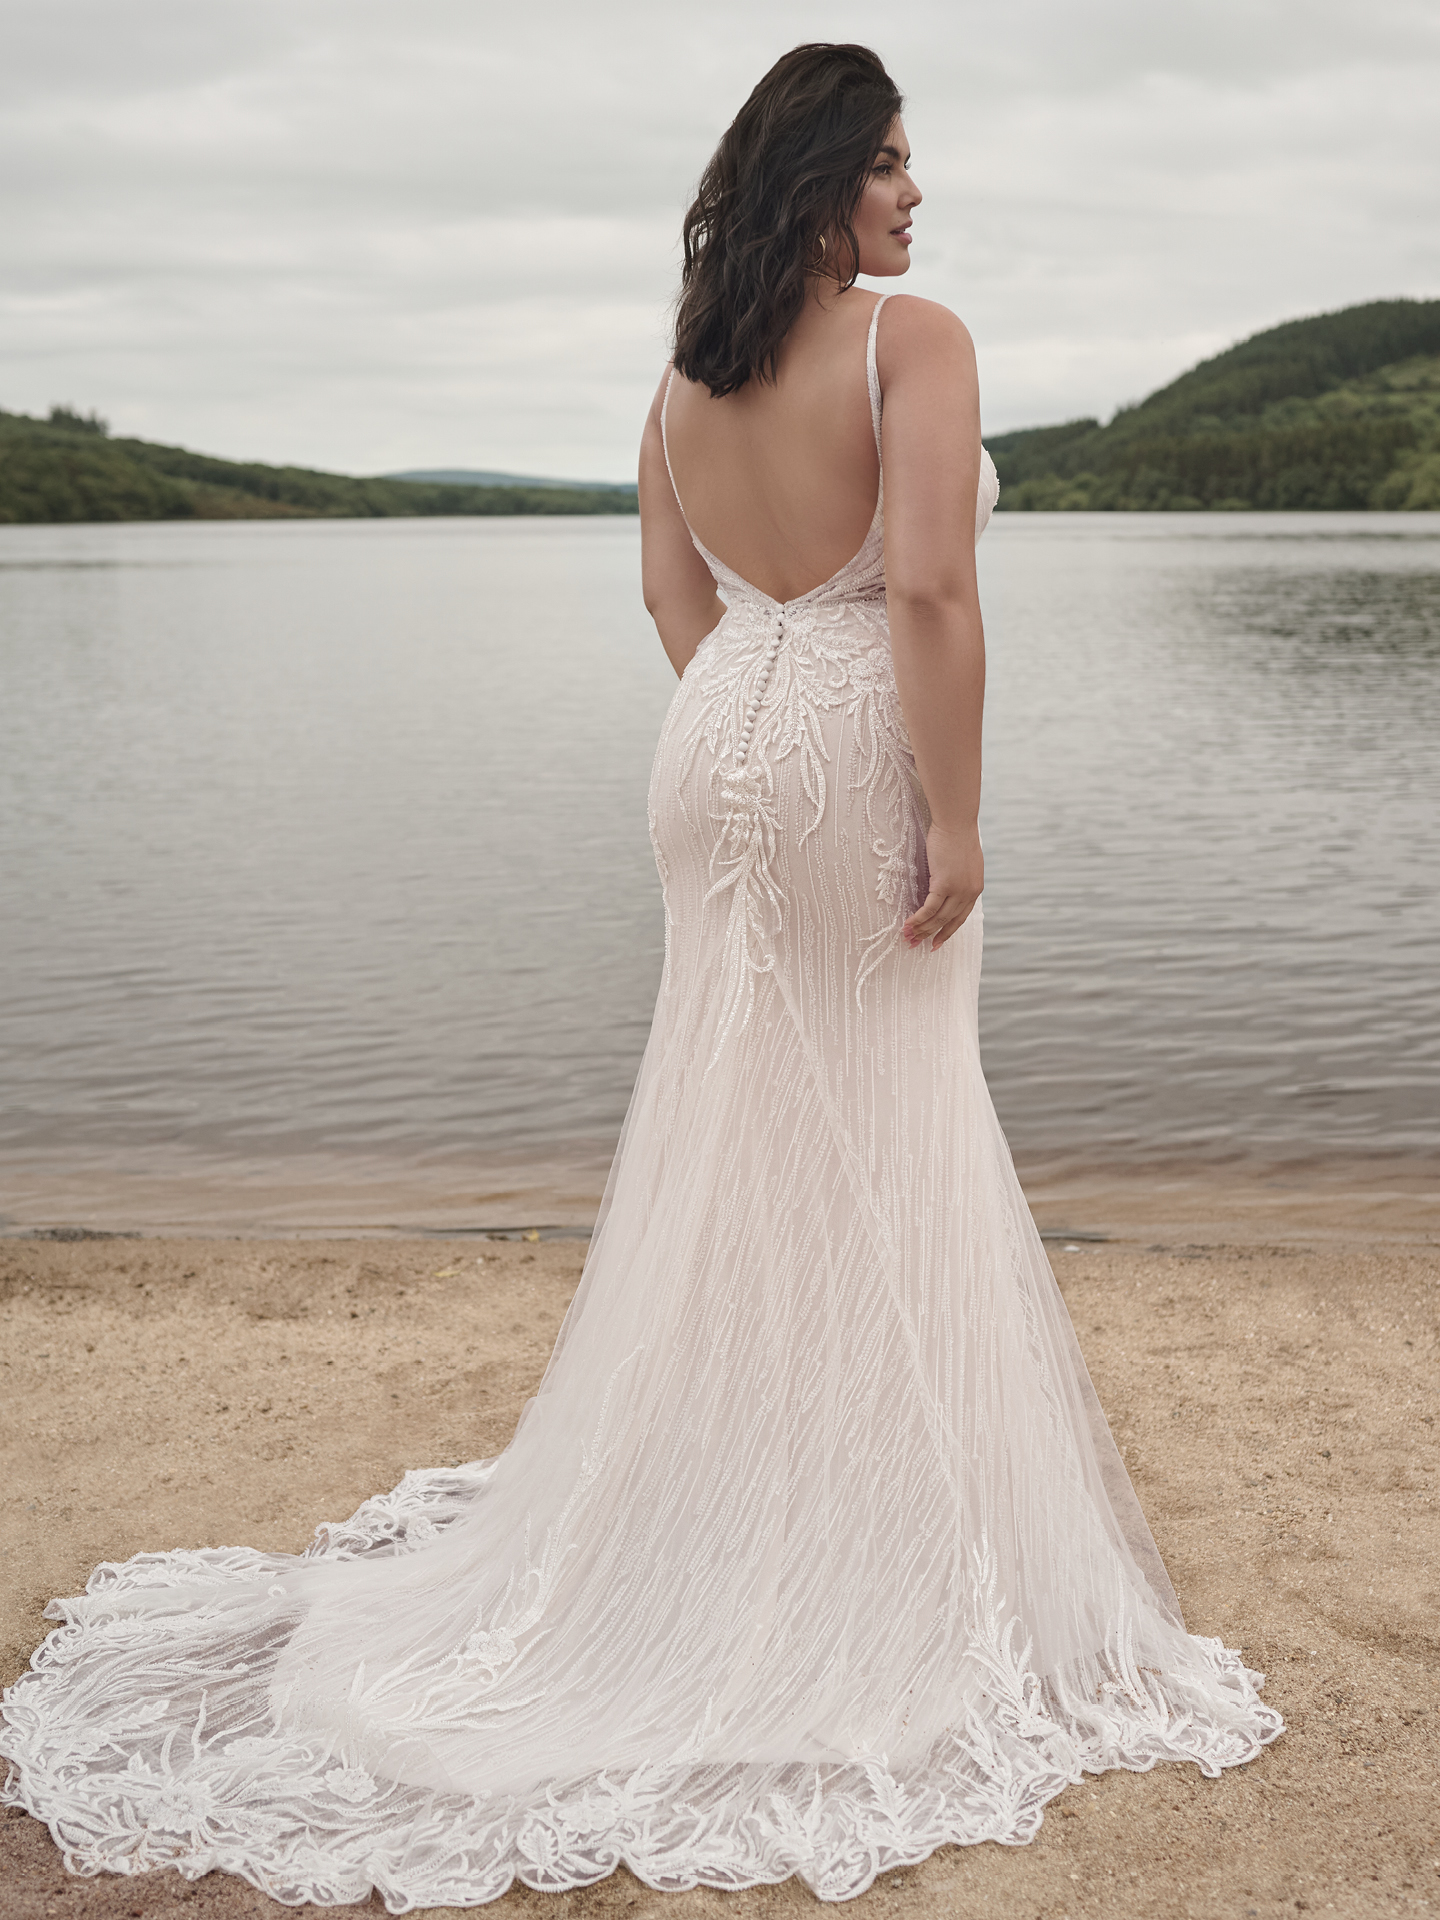 Bride In Beaded Wedding Dress Called Luella By Sottero And Midgley